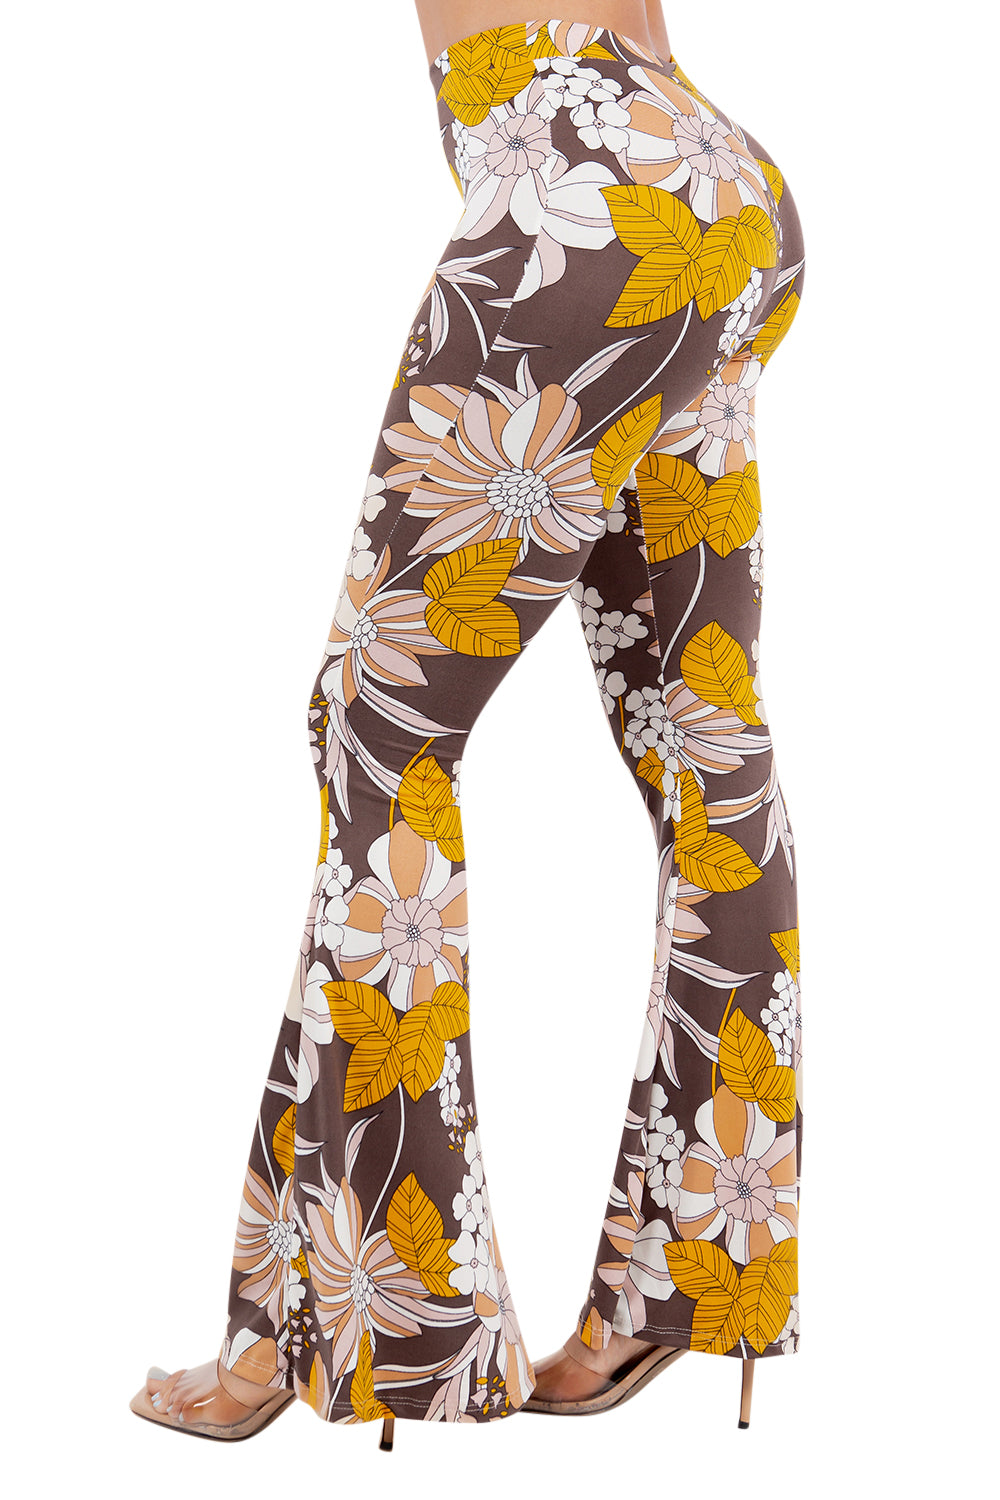 Women's Floral Print Stretchy Bell Bottom Flare Pants